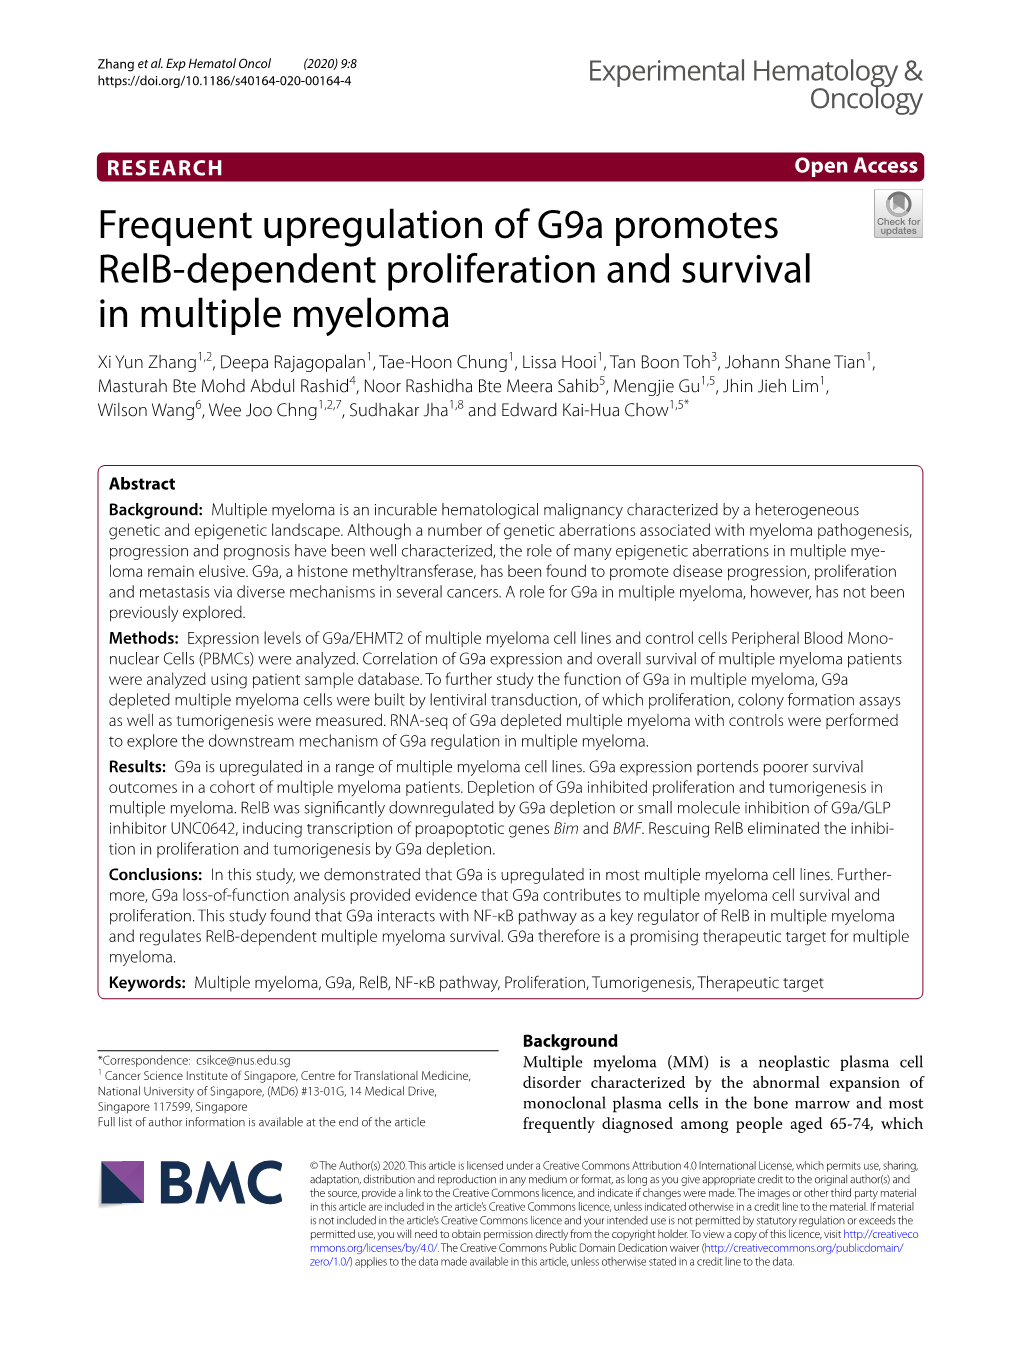 Frequent Upregulation of G9a Promotes Relb-Dependent